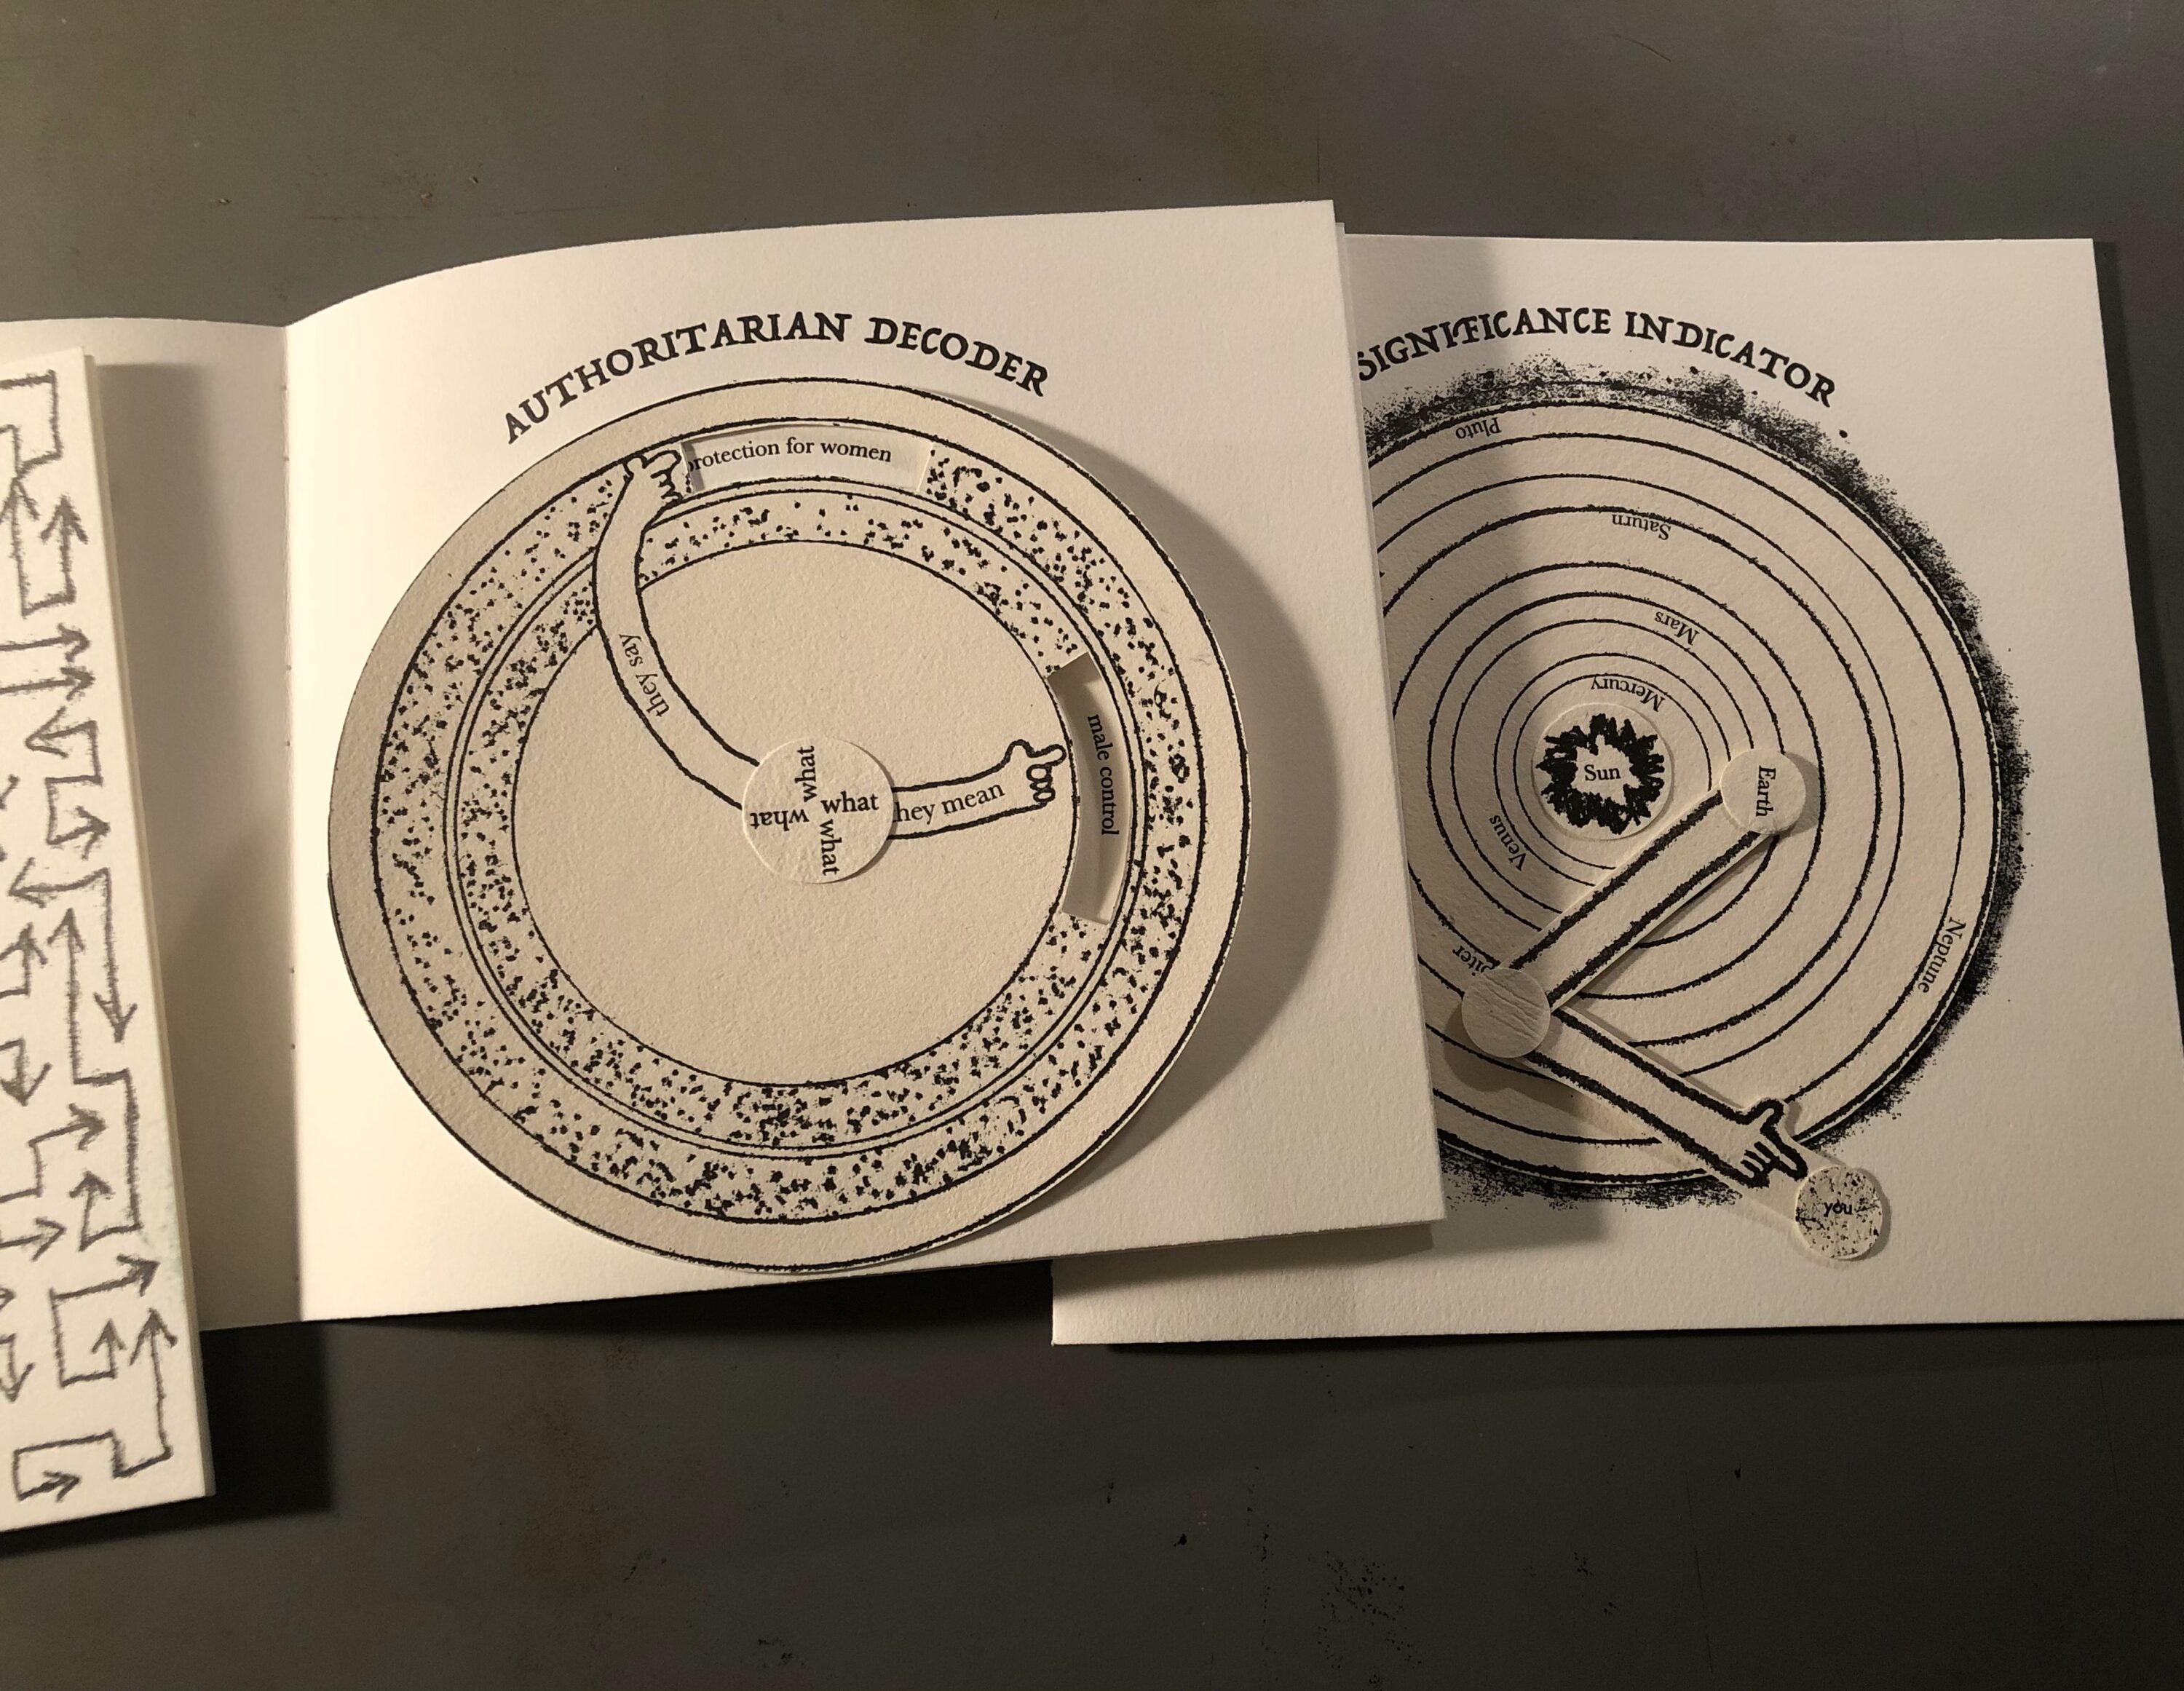 Two examples of volvelle books with circular pages that can be rotated by the reader to reveal and conceal content. One is titled "Authoritarian Decoder" and reads "what they say: protection for women; what they mean: male control." The other is titled "Significance Indicator" and has the solar system's planets and orbits printed on the circle.